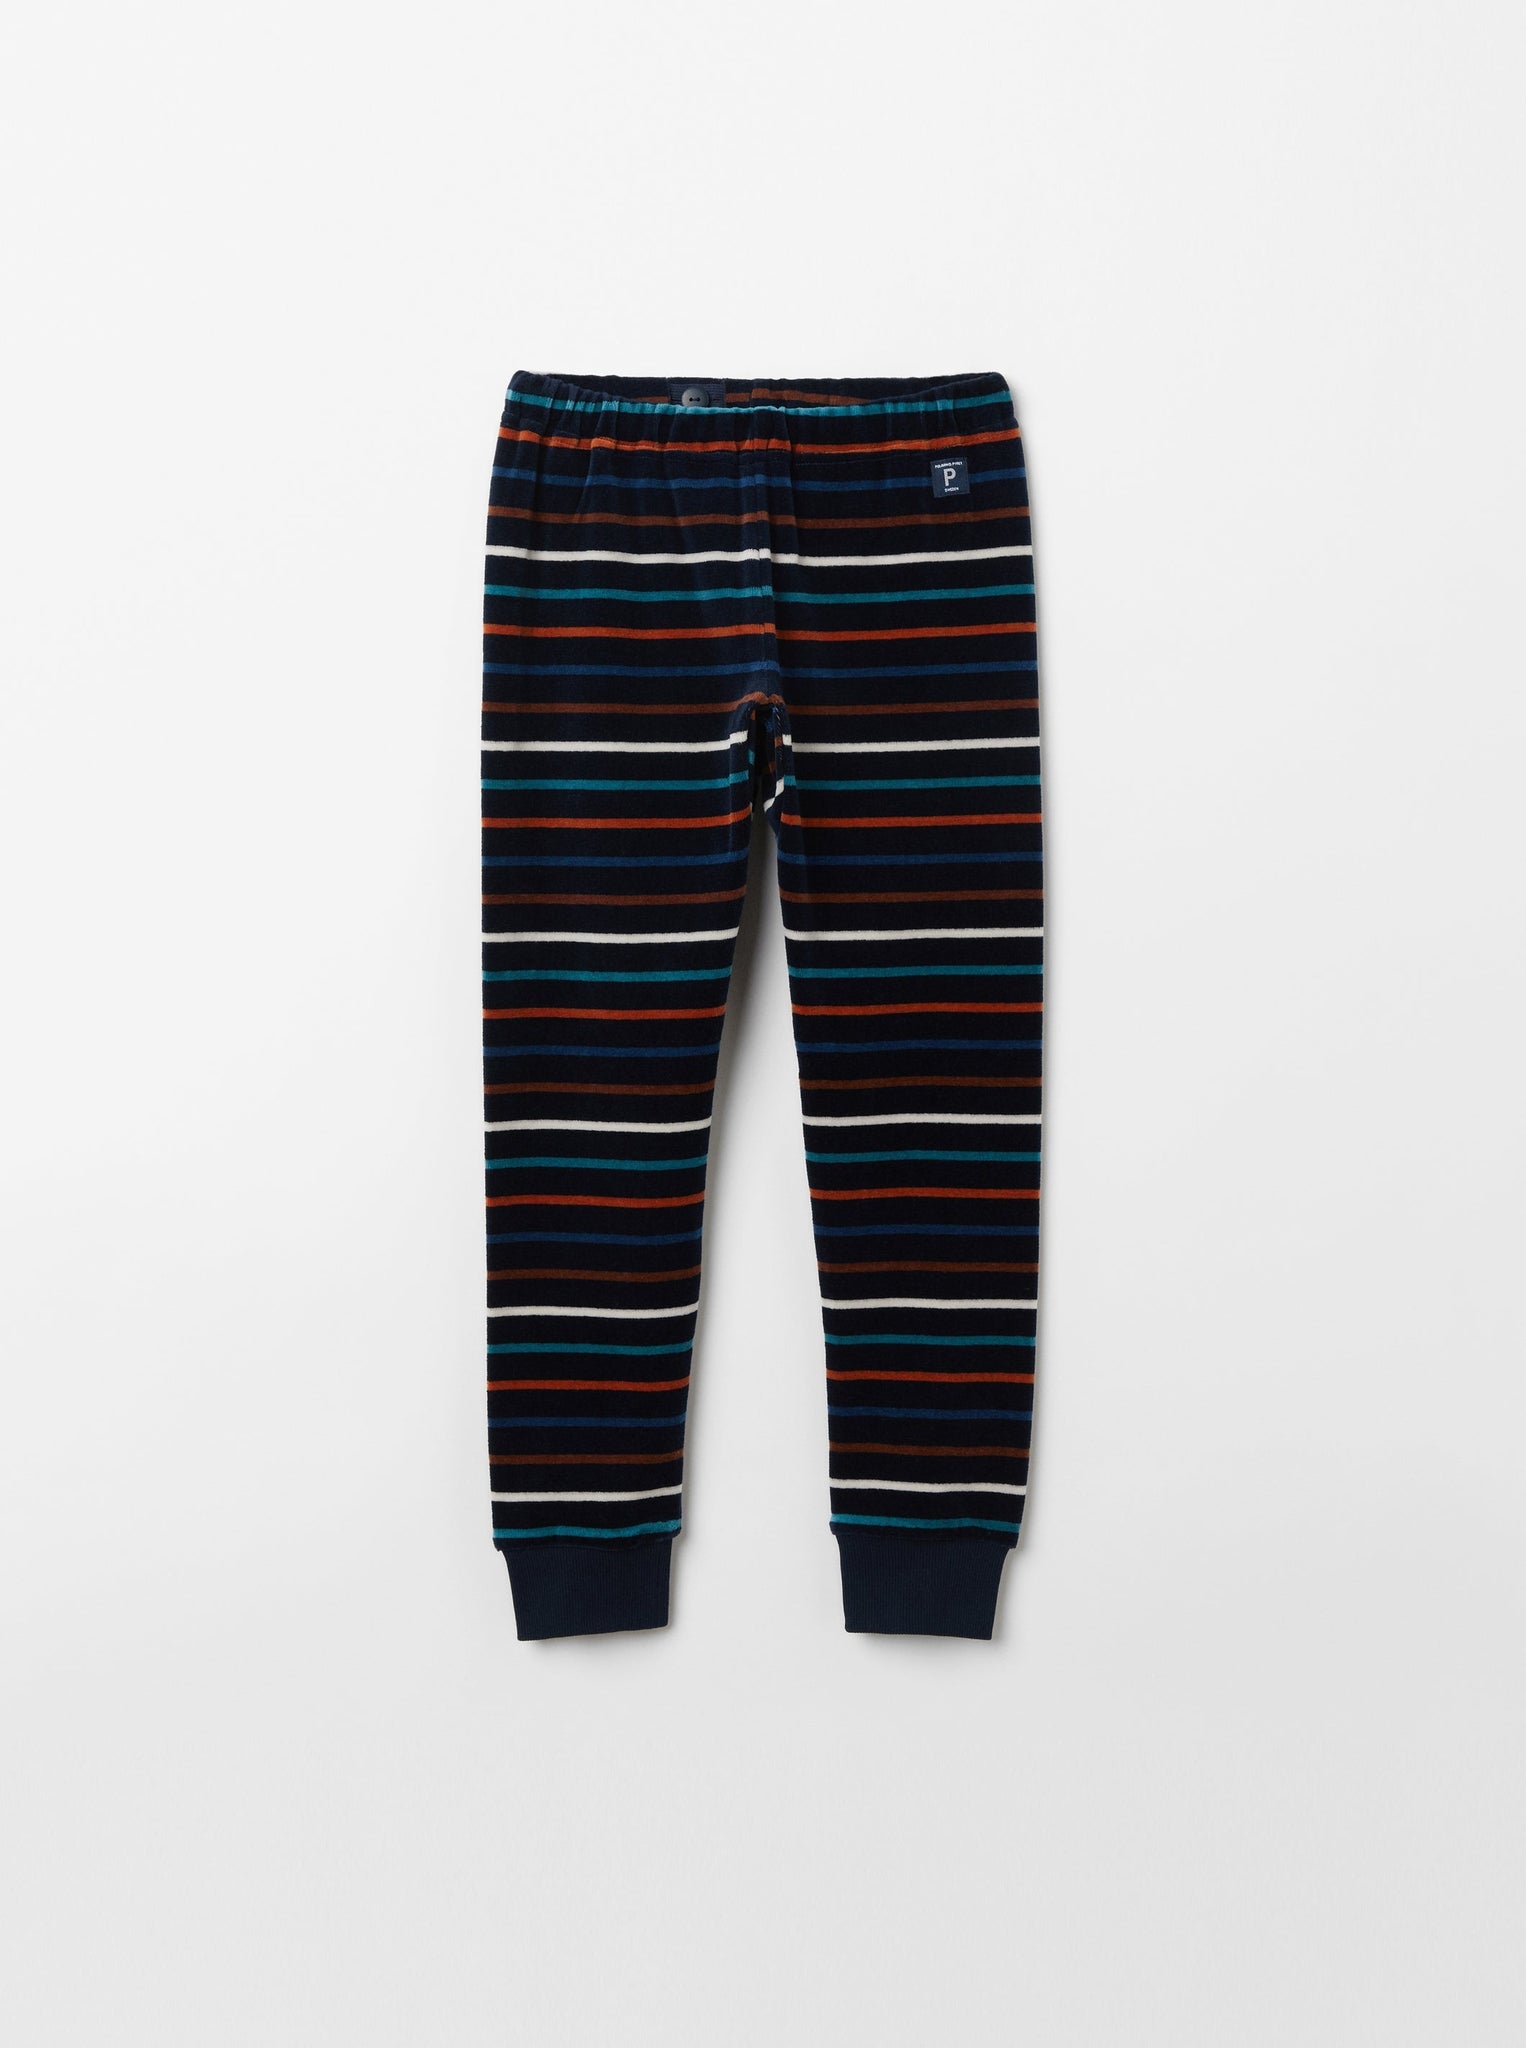 Striped Navy Velour Kids Leggings from the Polarn O. Pyret kidswear collection. Clothes made using sustainably sourced materials.